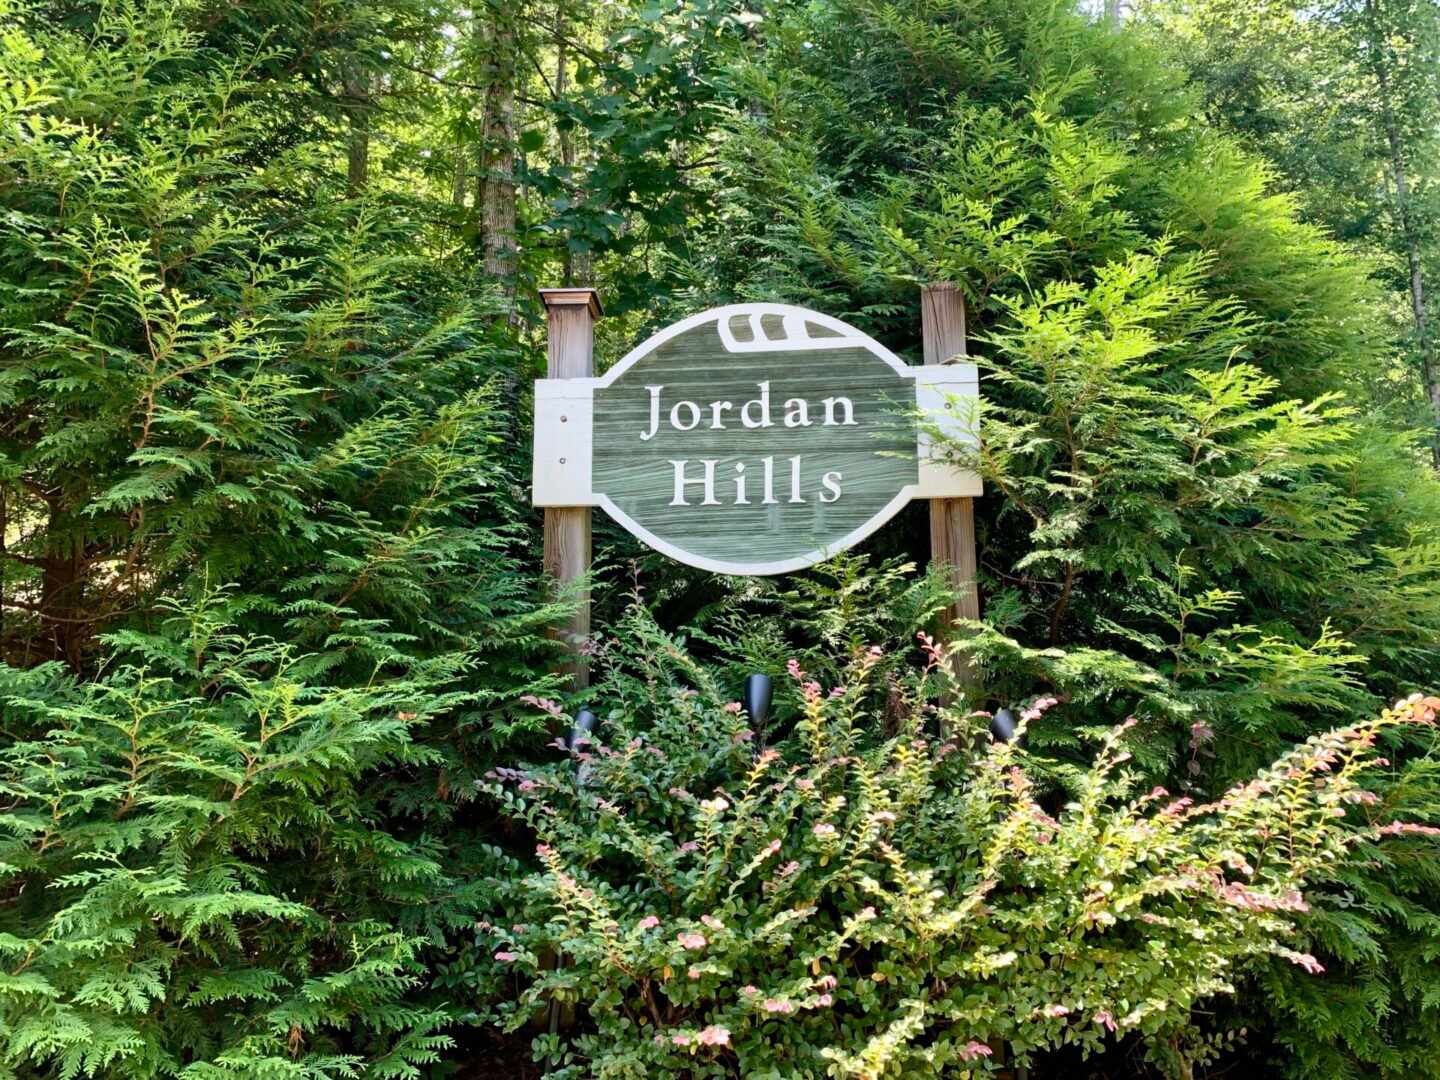 Jordan Hills Name Plate and Trees Around It